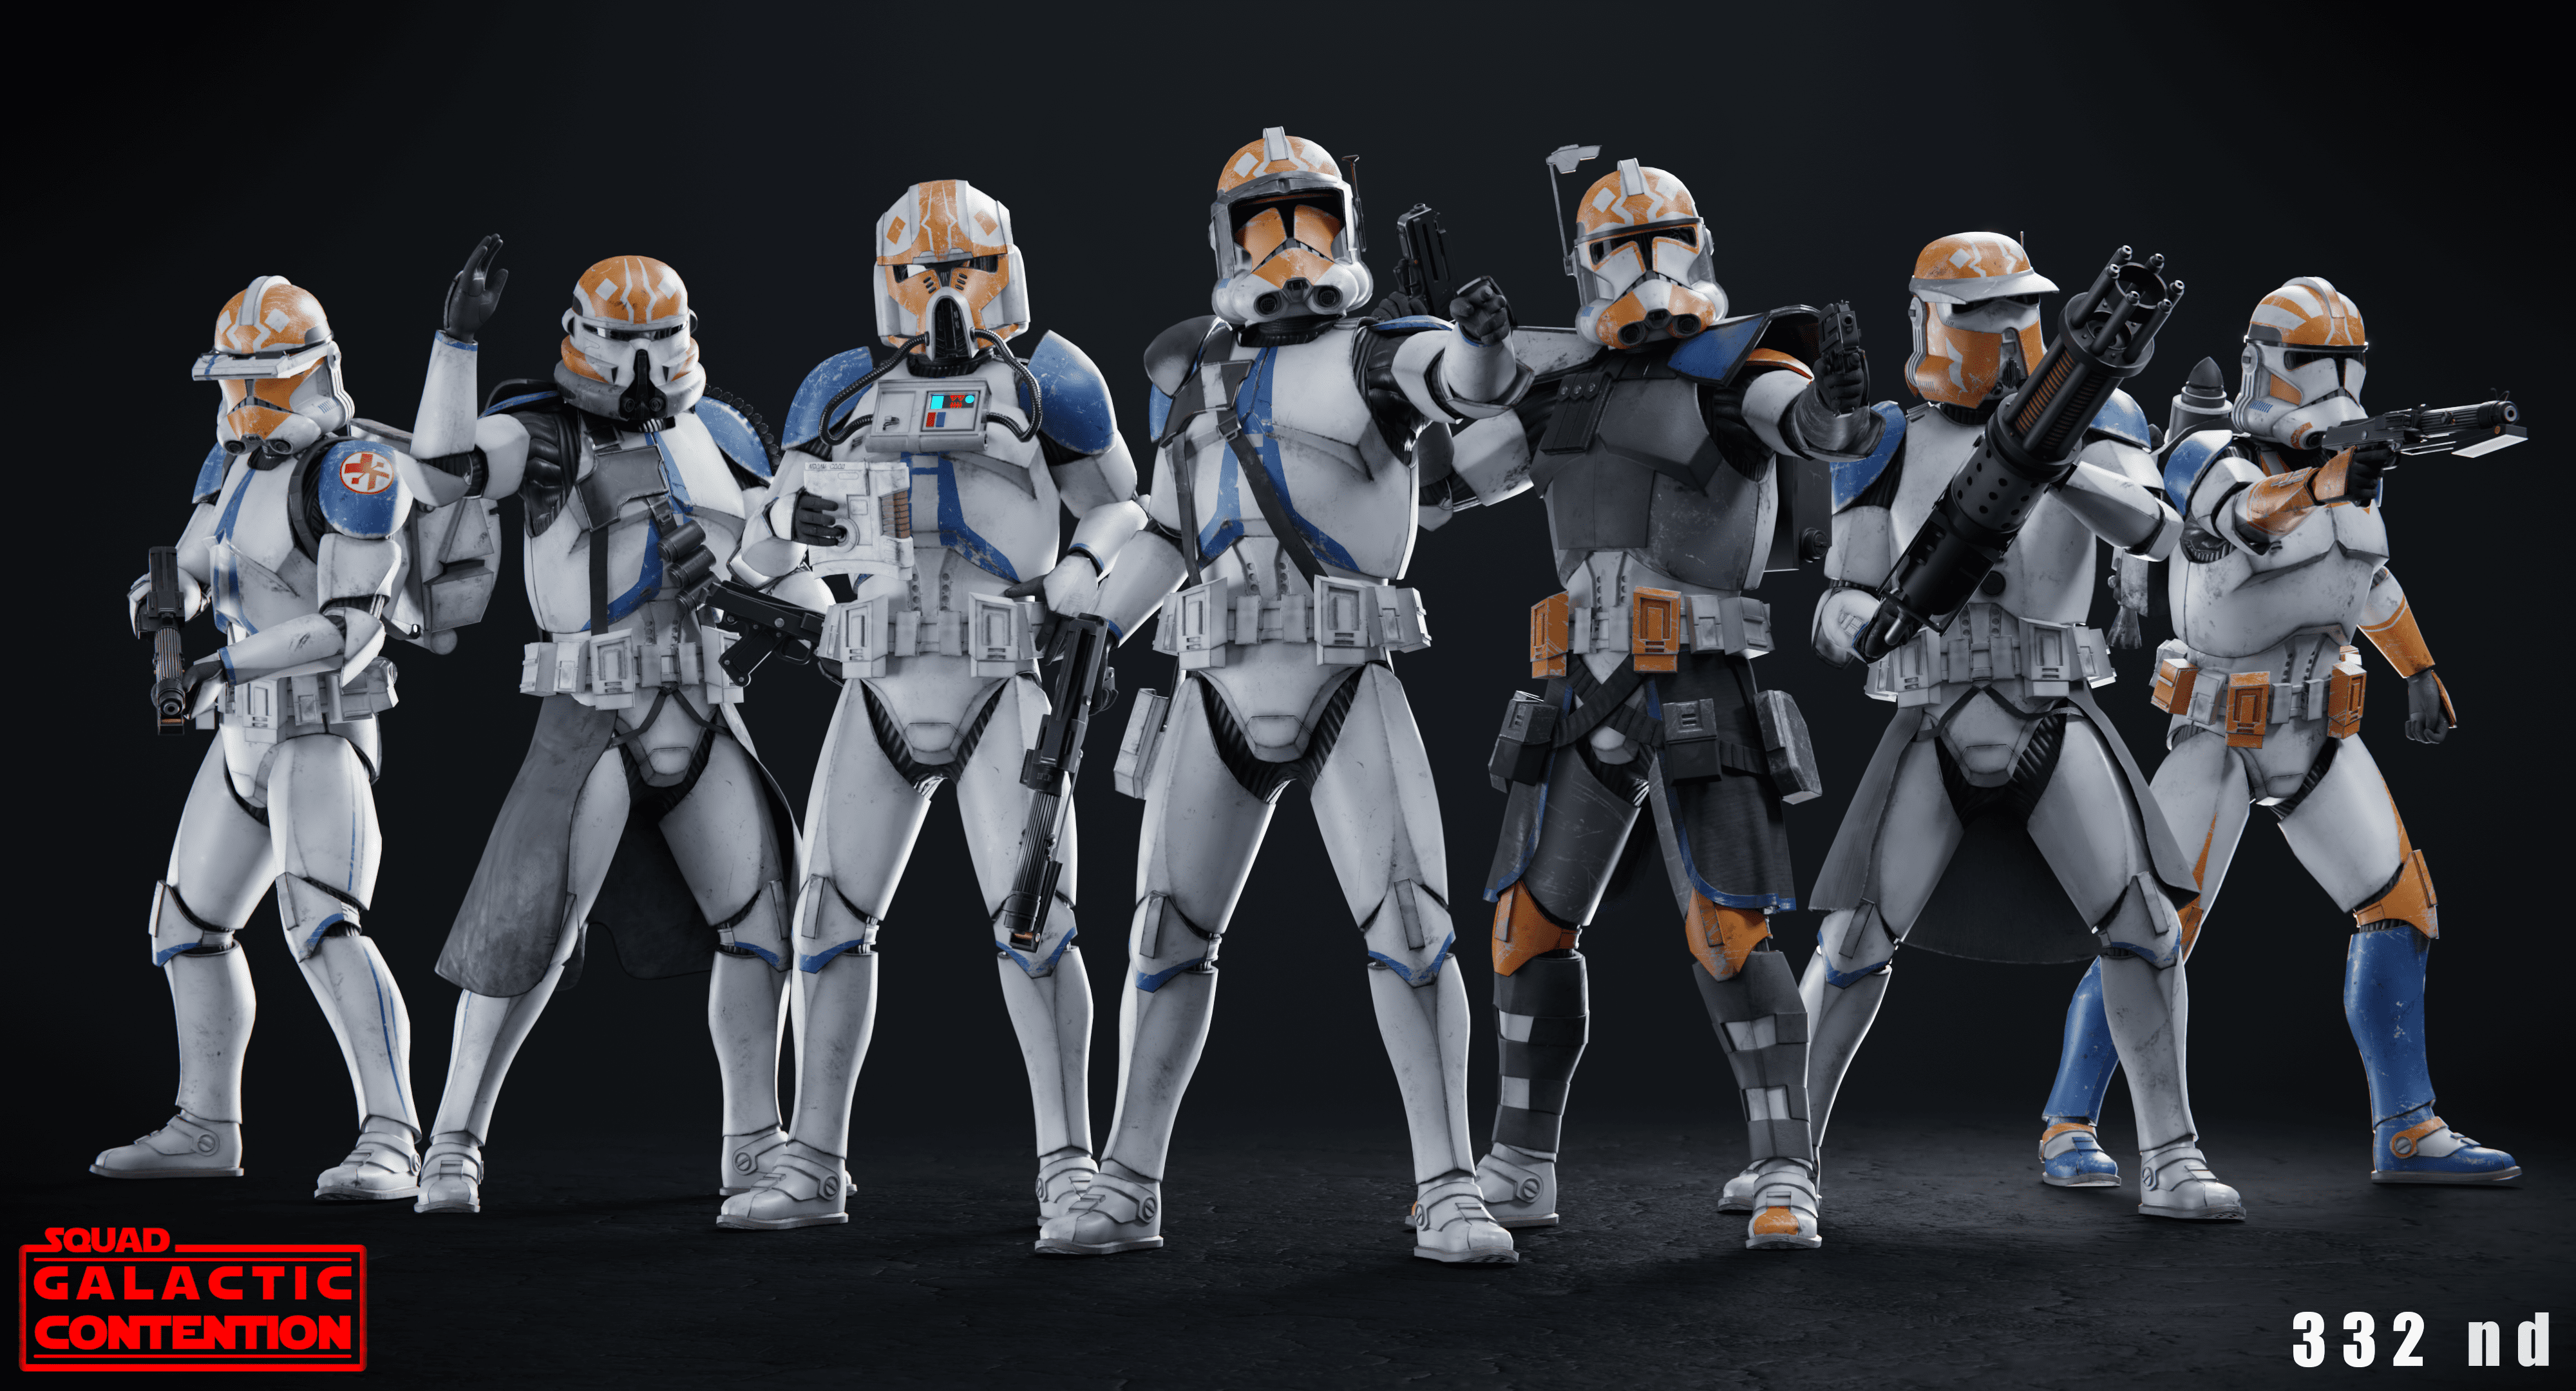 The 332nd Company (Phase 2) image - Galactic Contention mod for Squad ...